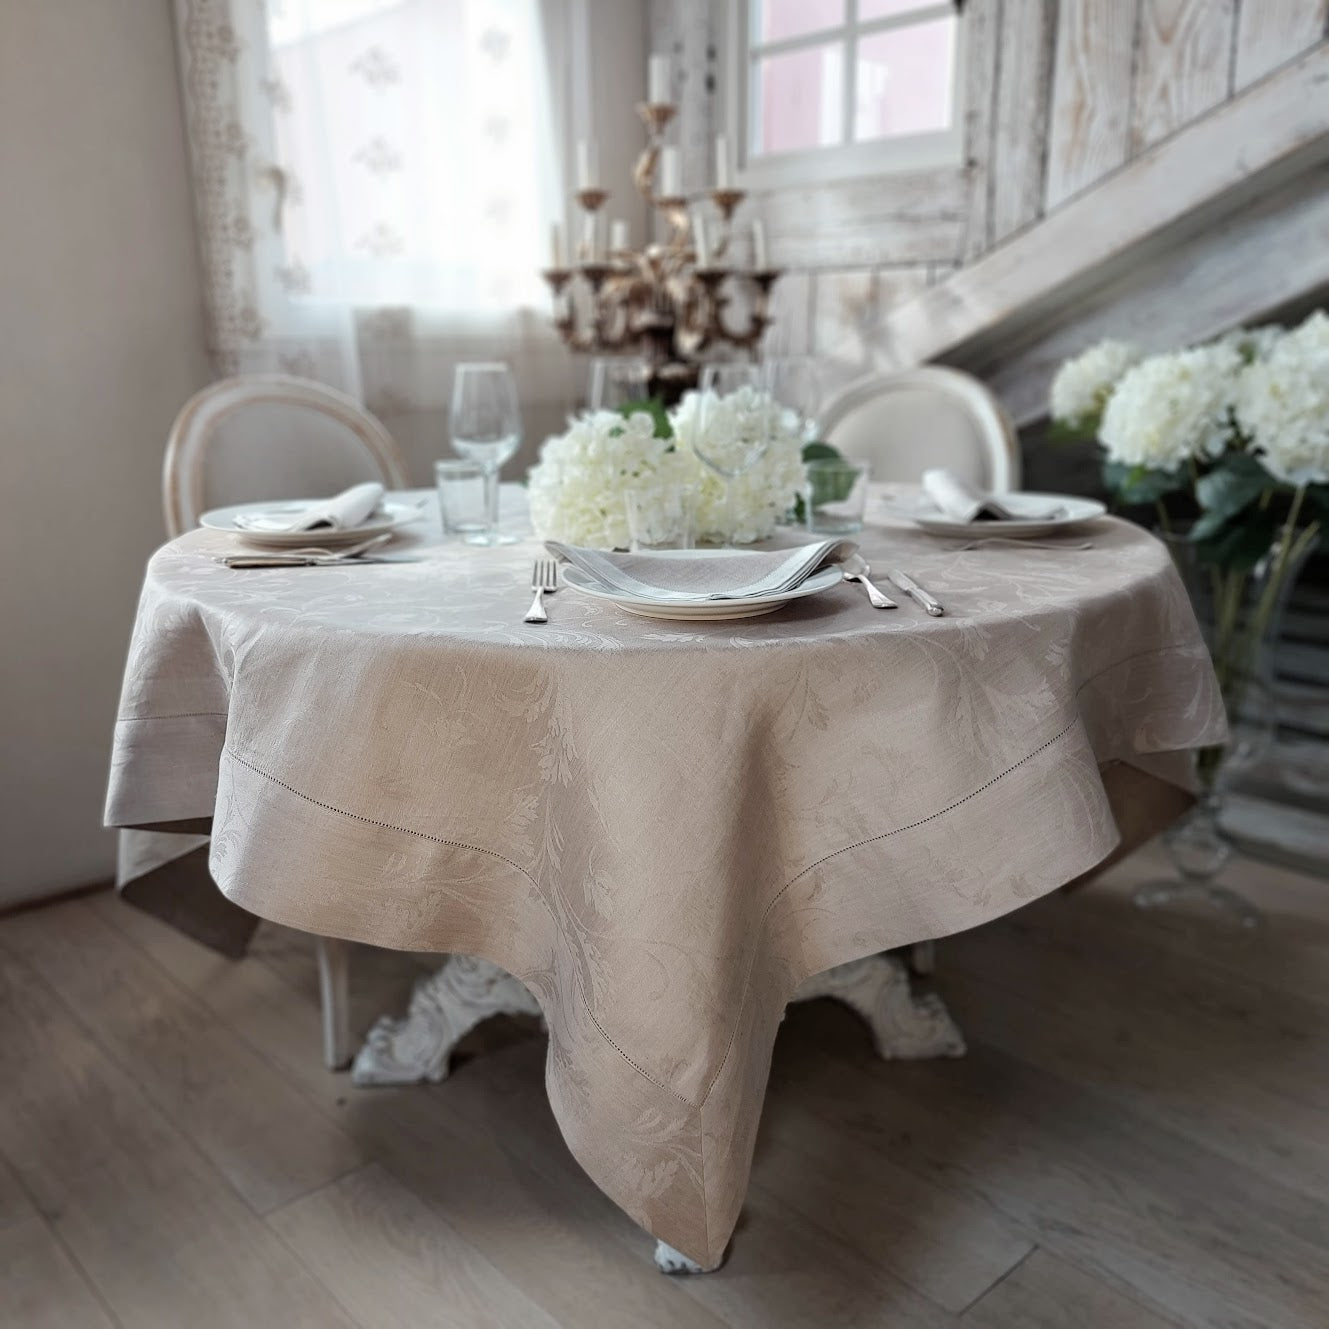 Ortensia jacquard linen tablecloth with hemstitch